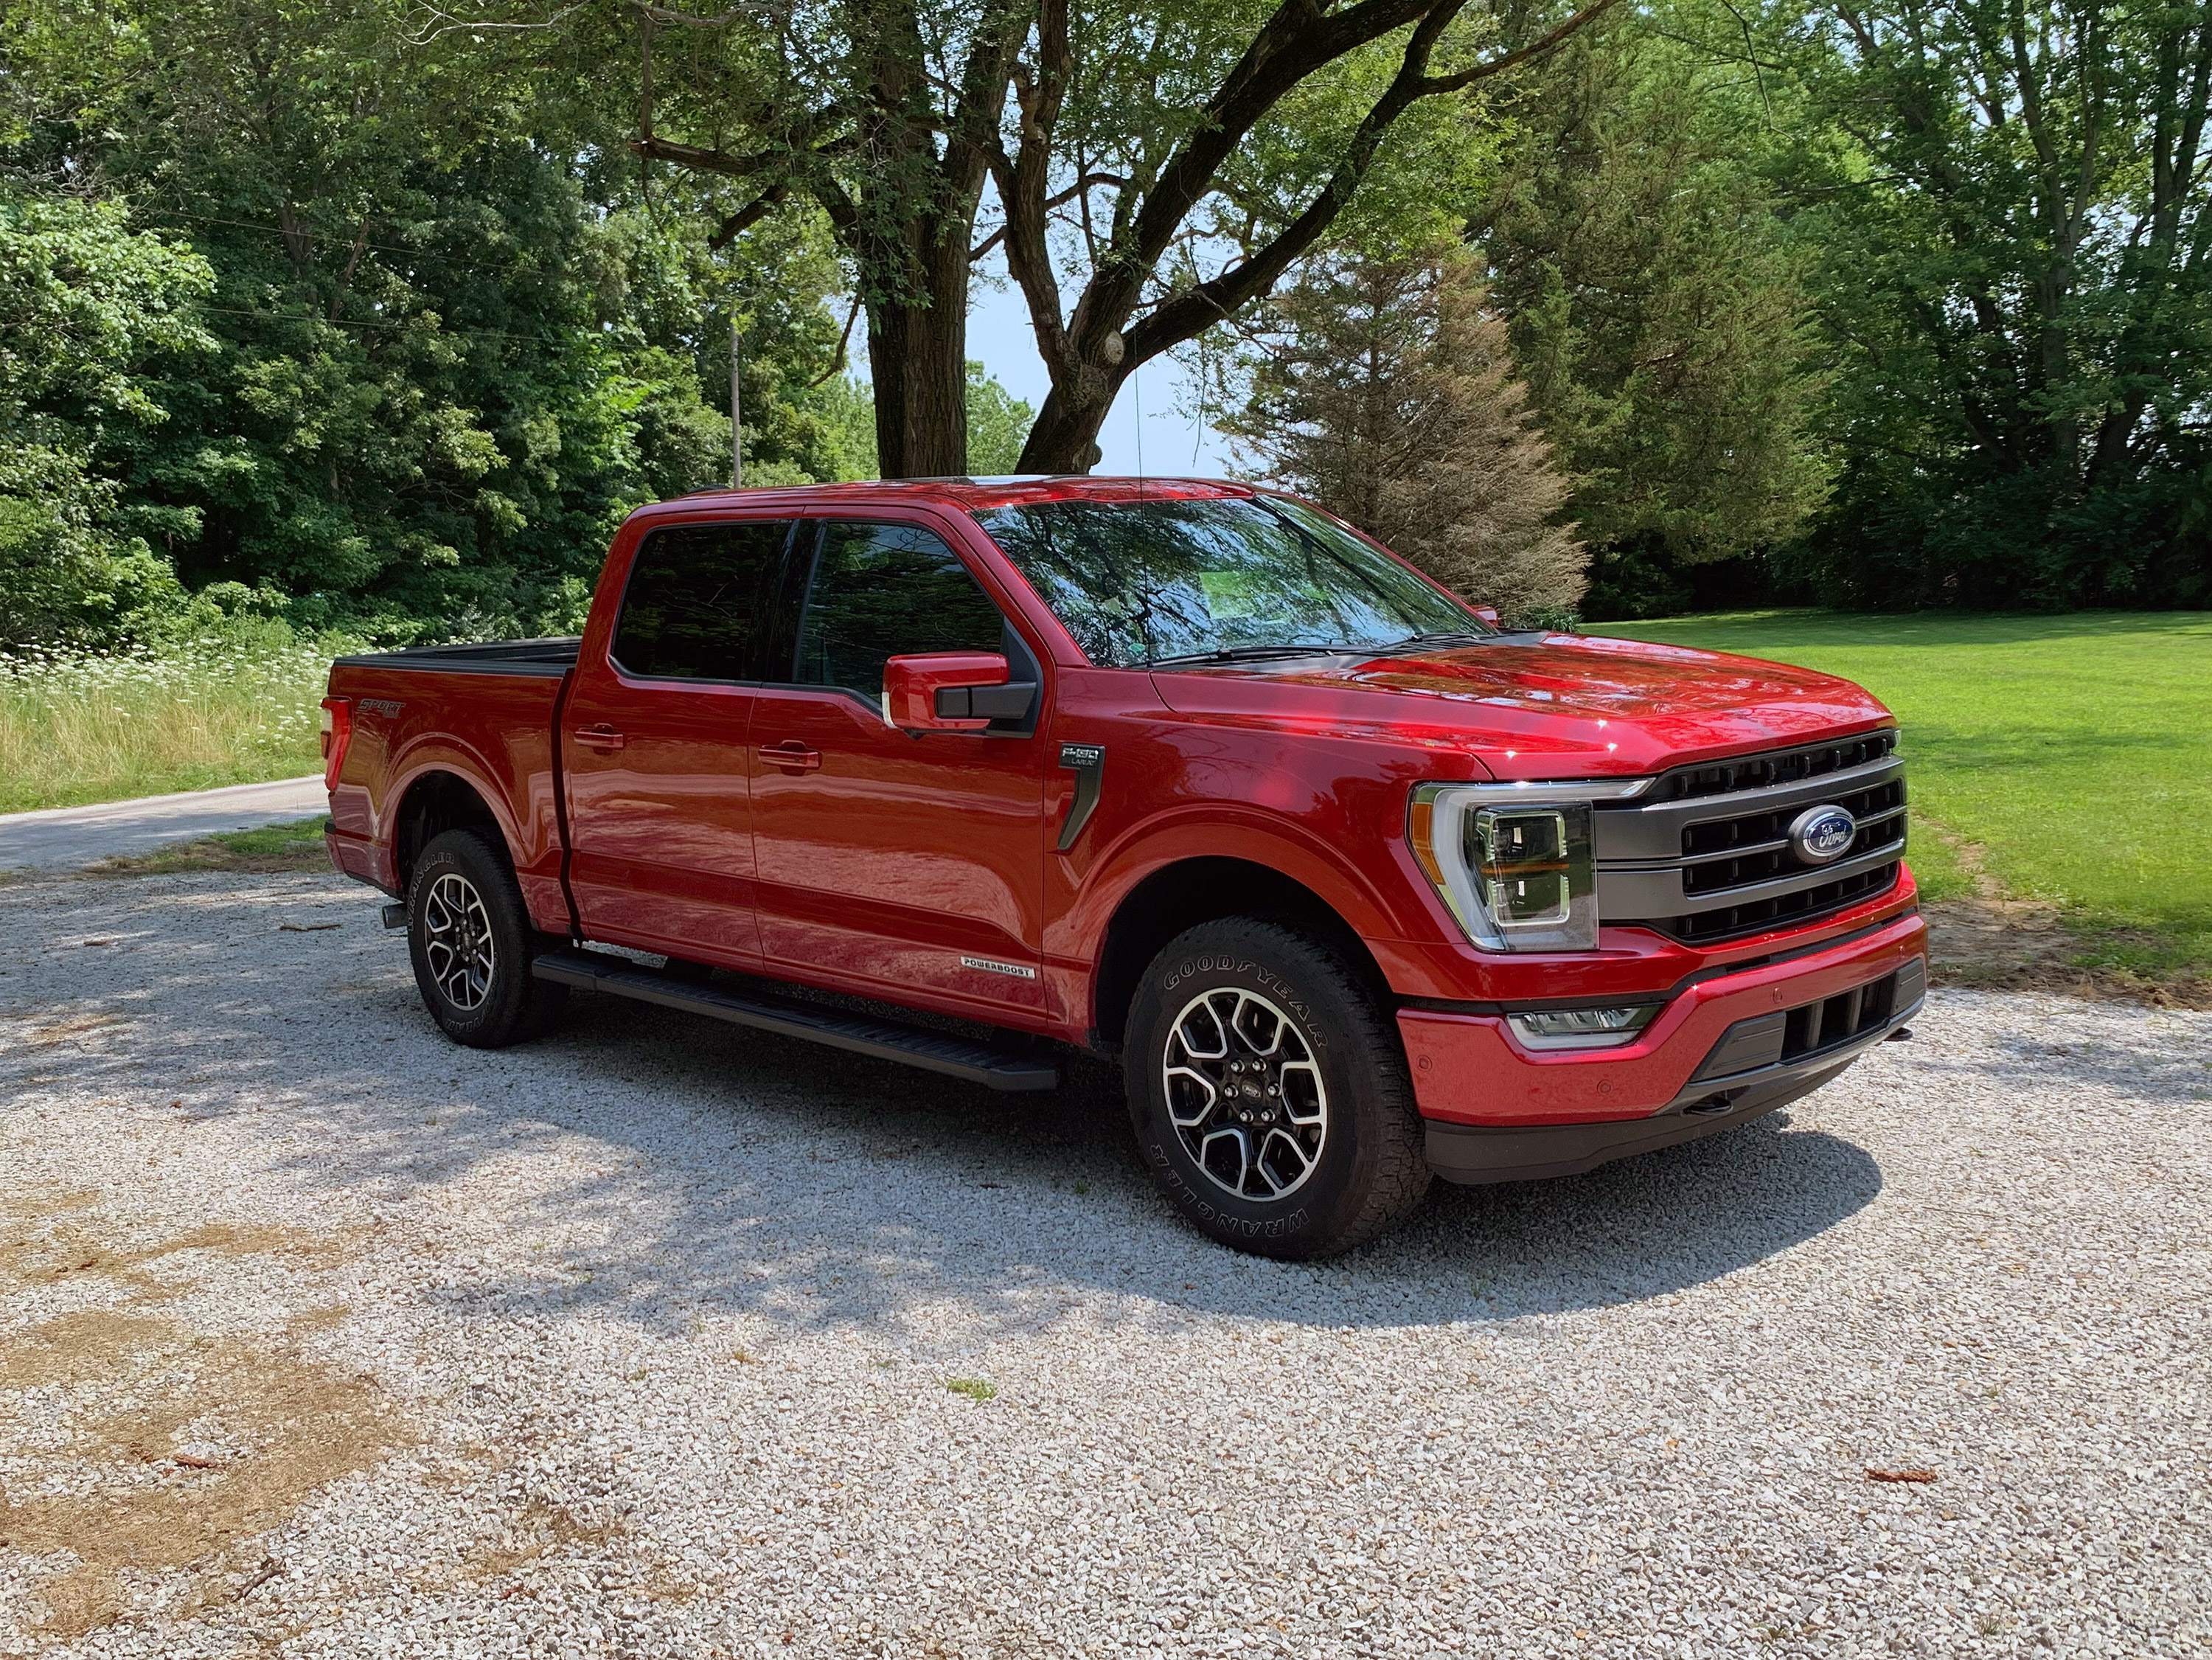 The Ford F-150, America's best-selling pickup truck, is going